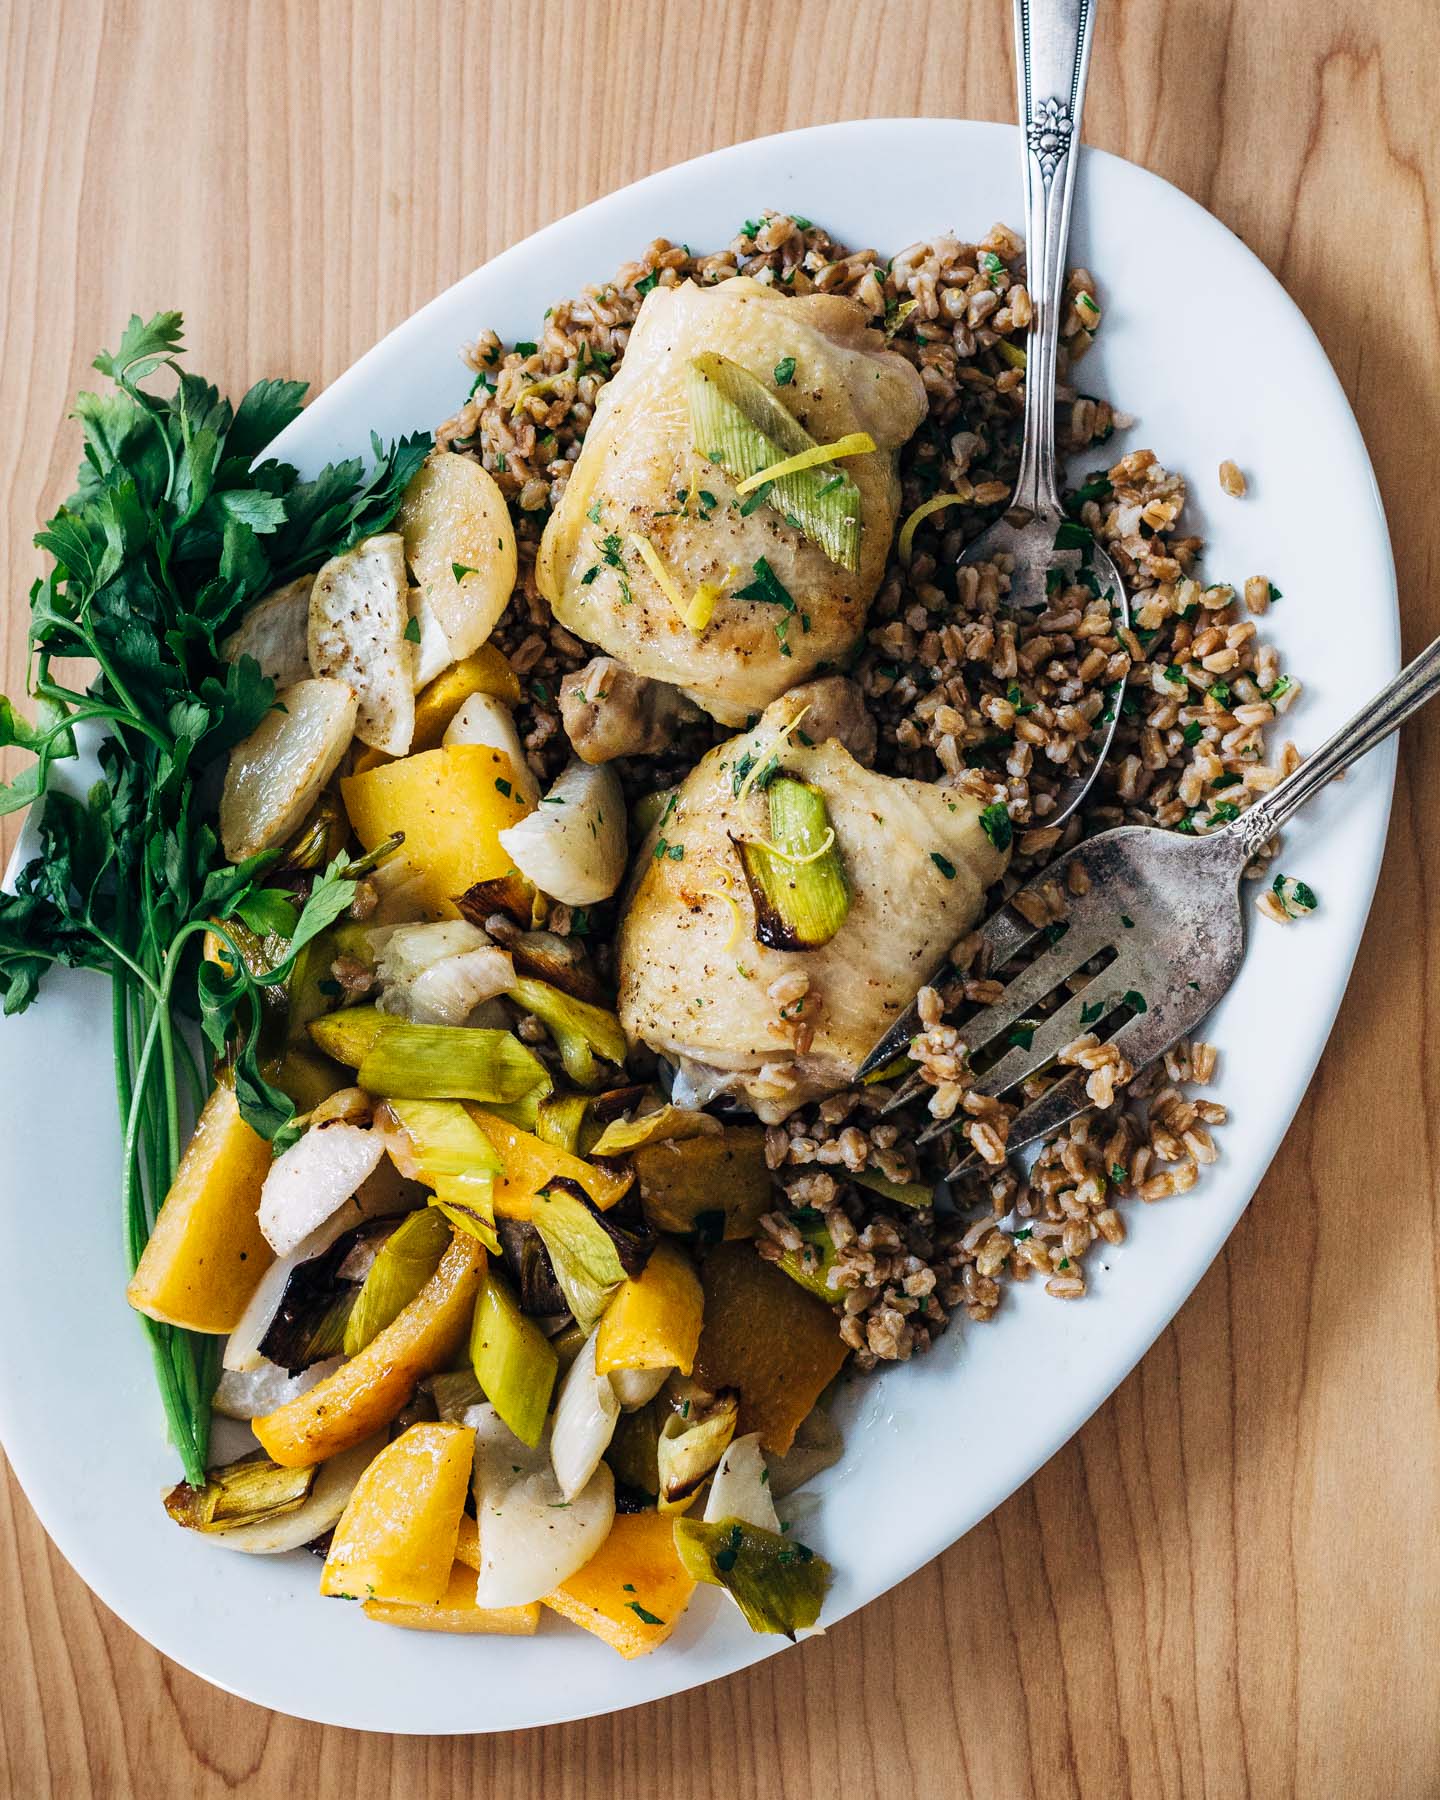 Sheet Pan Roasted Chicken and Vegetables Over Herbed Farro from brooklynsupper.com on foodiecrush.com